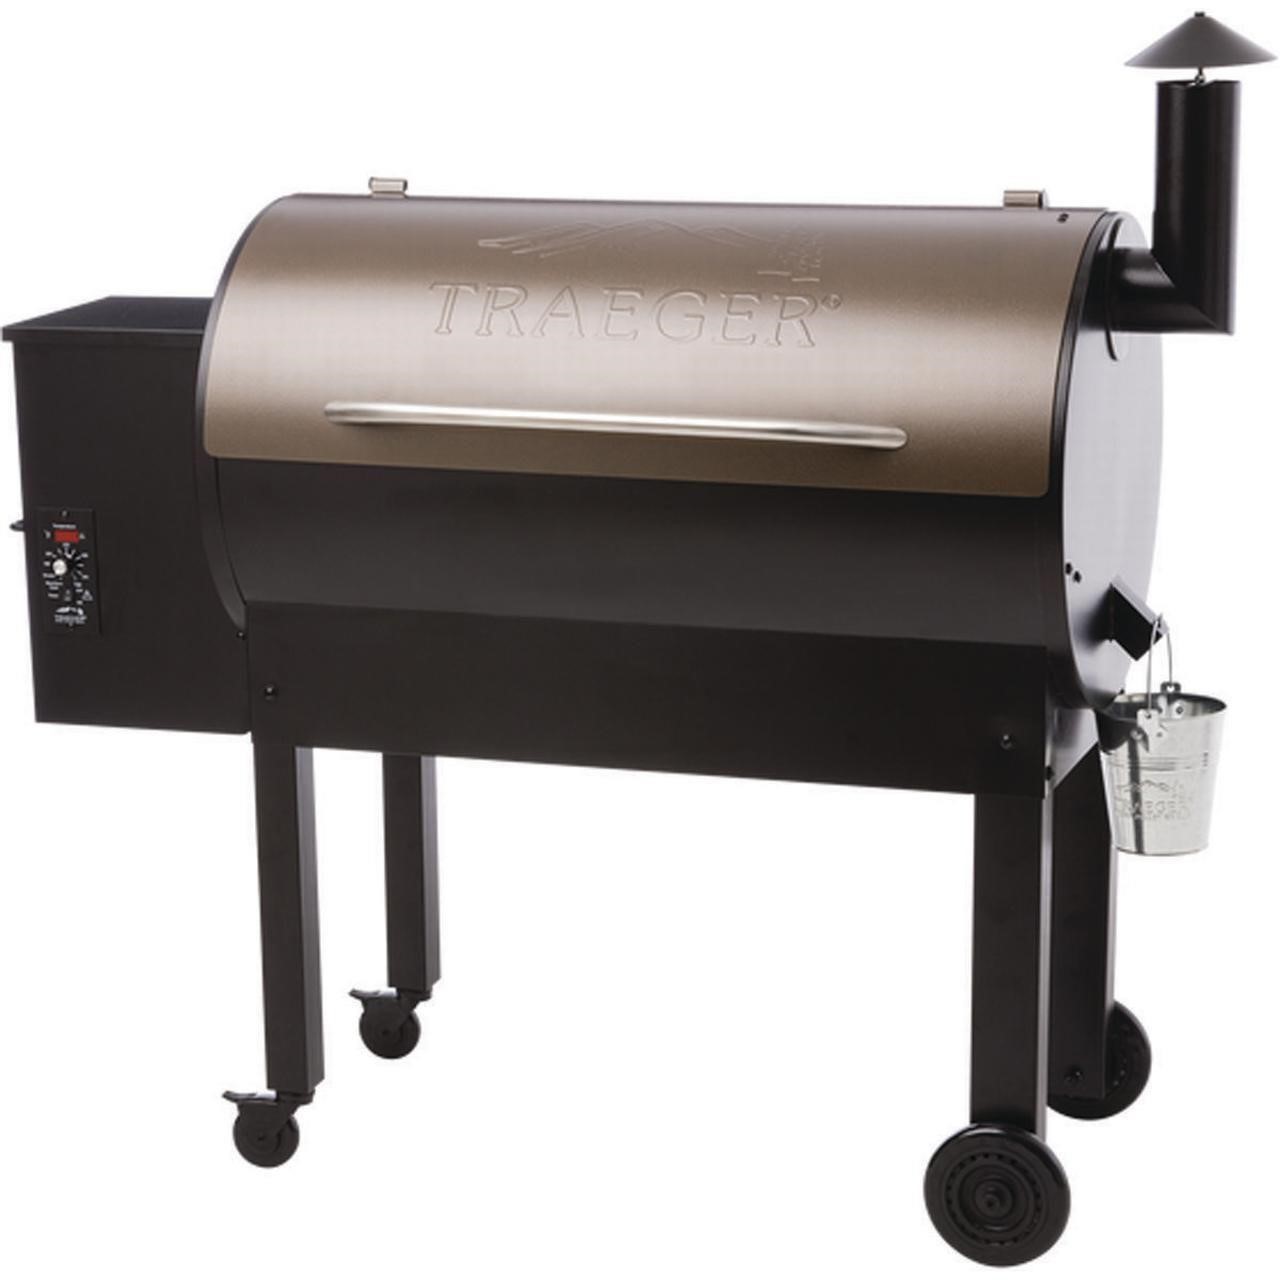 $699 Traeger Wood Grill